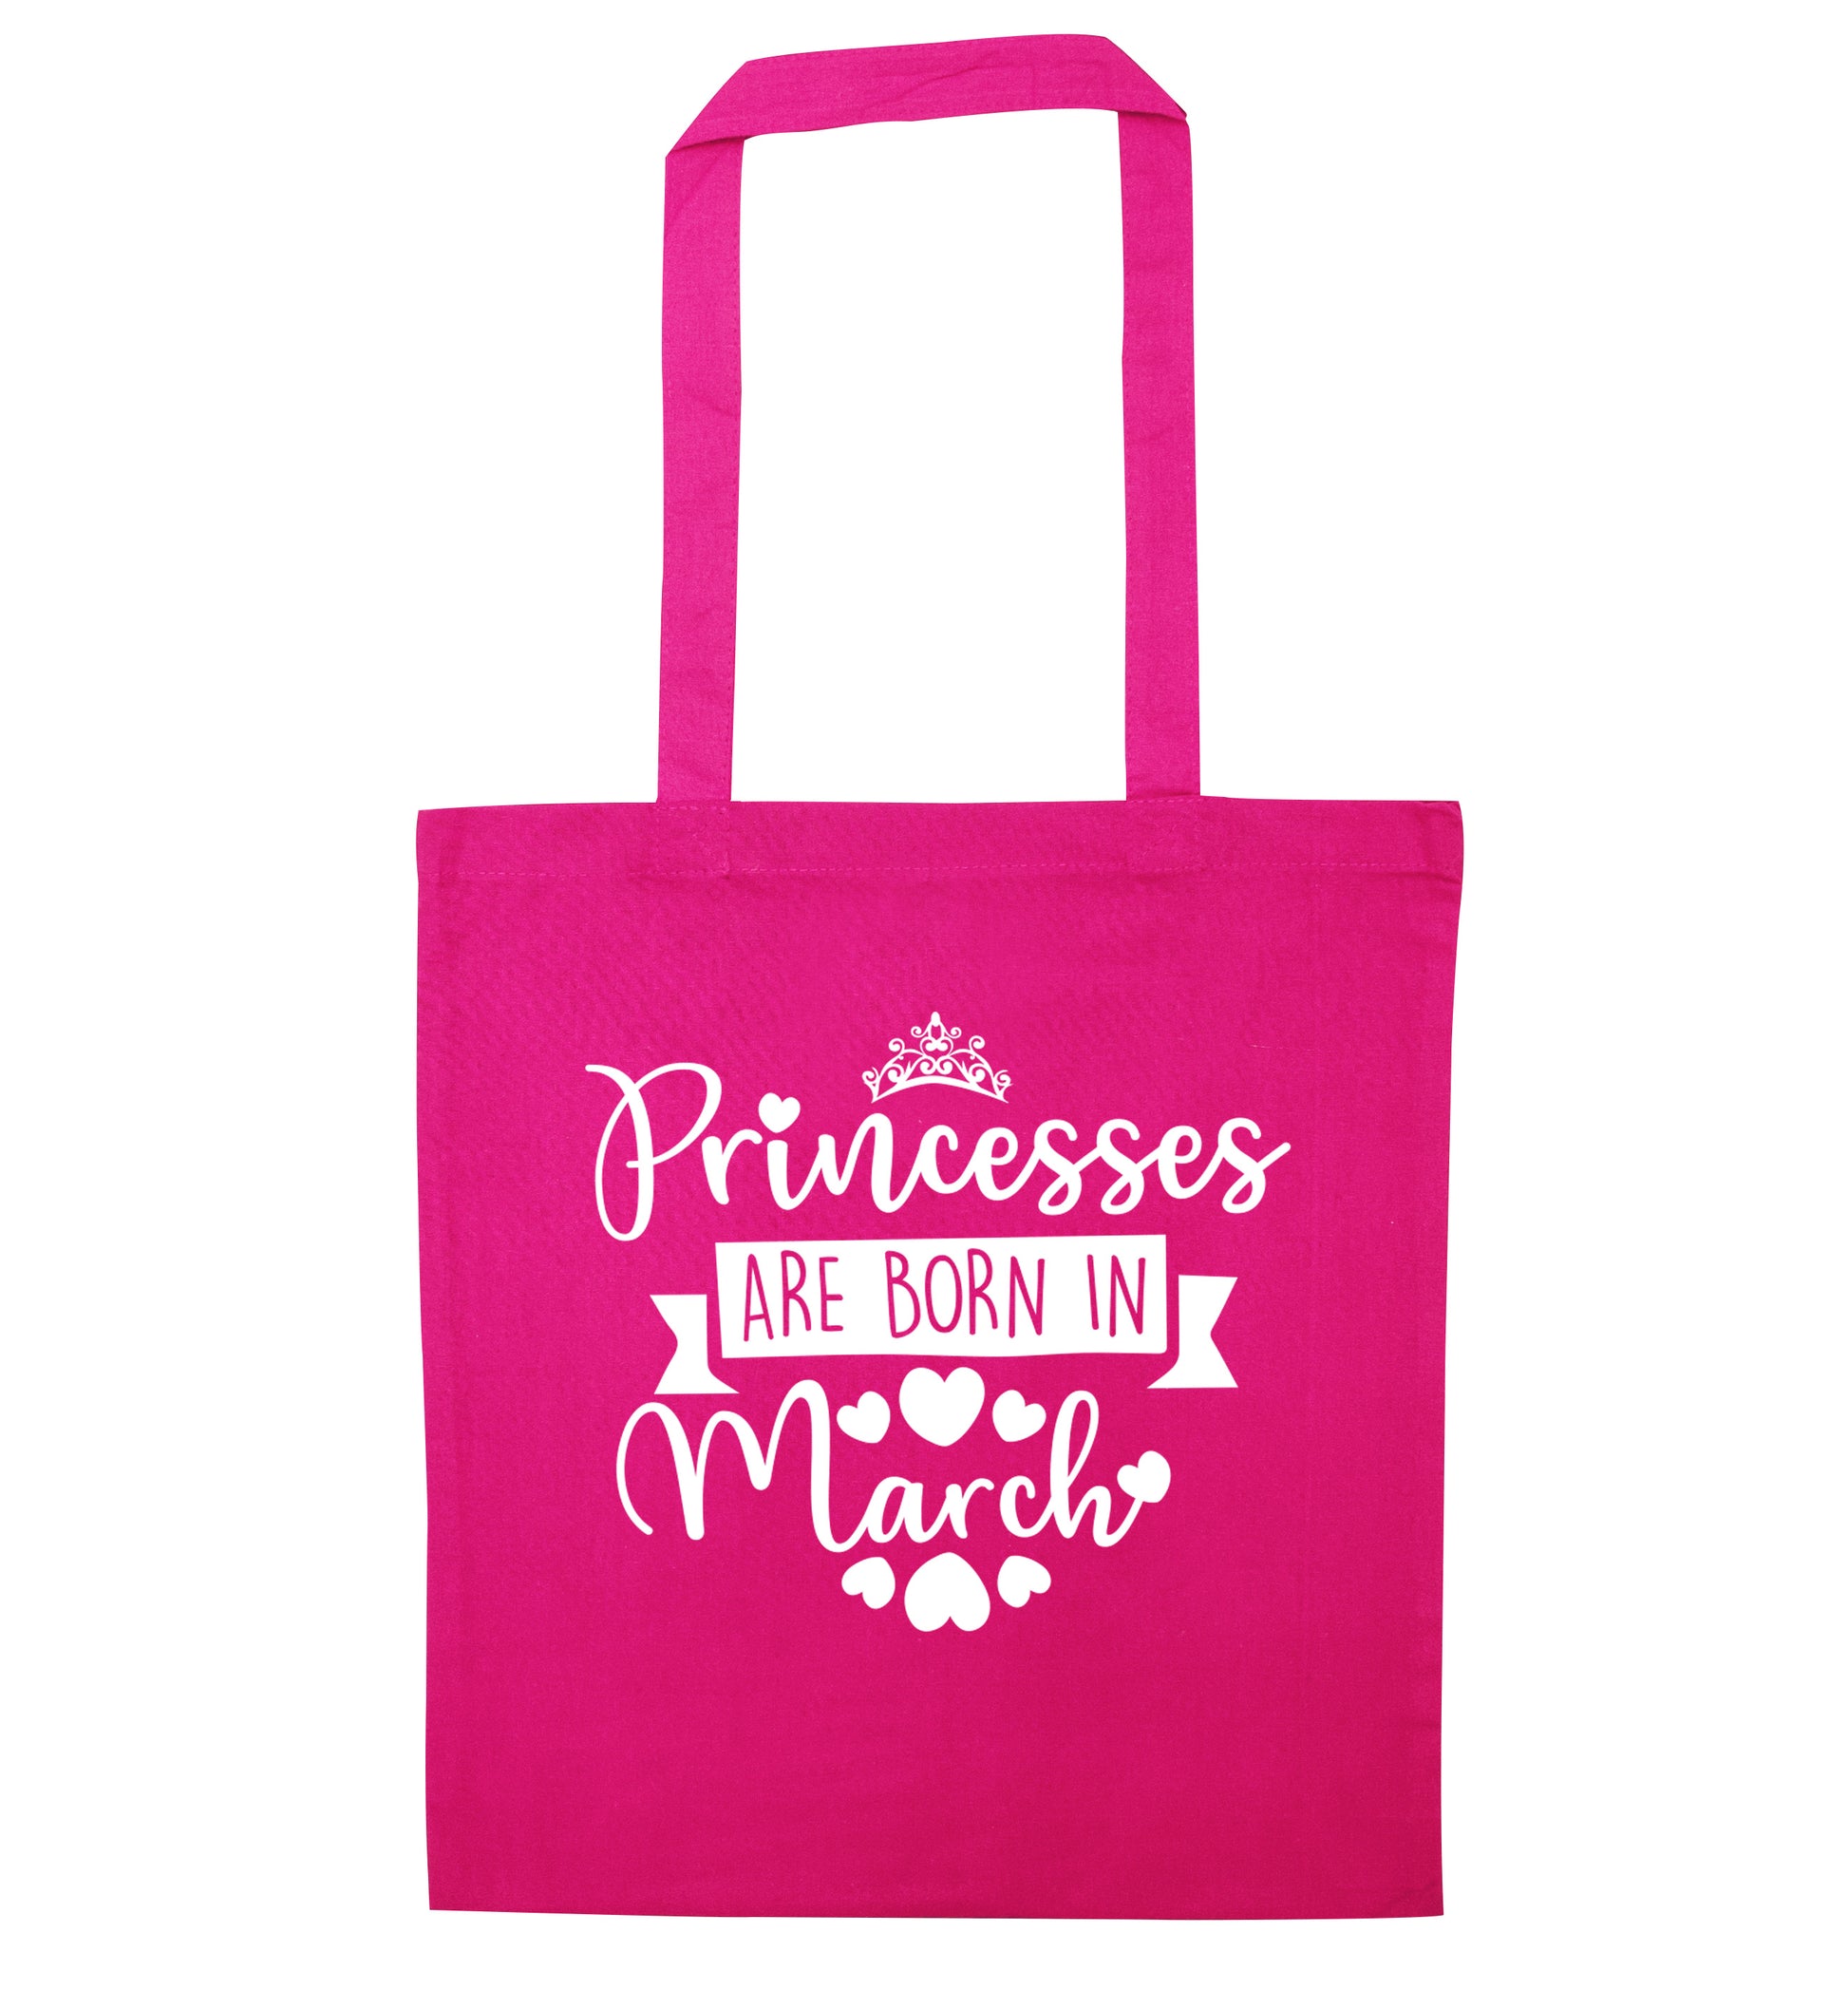 Princesses are born in March pink tote bag